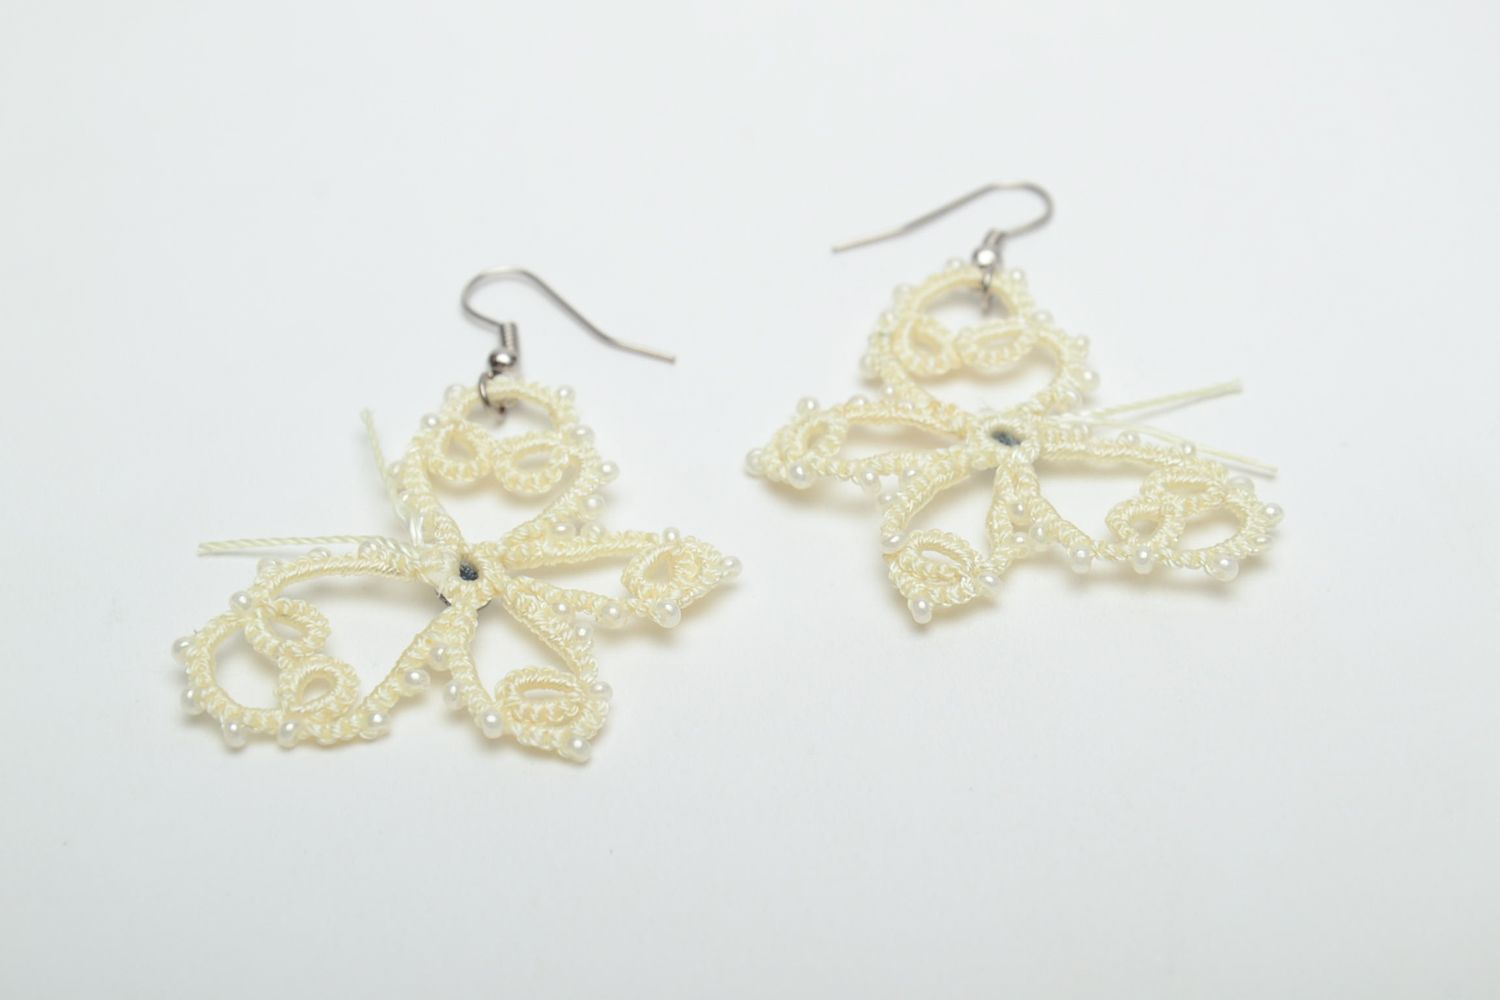 Lace earrings with beads made using tatting technique photo 4